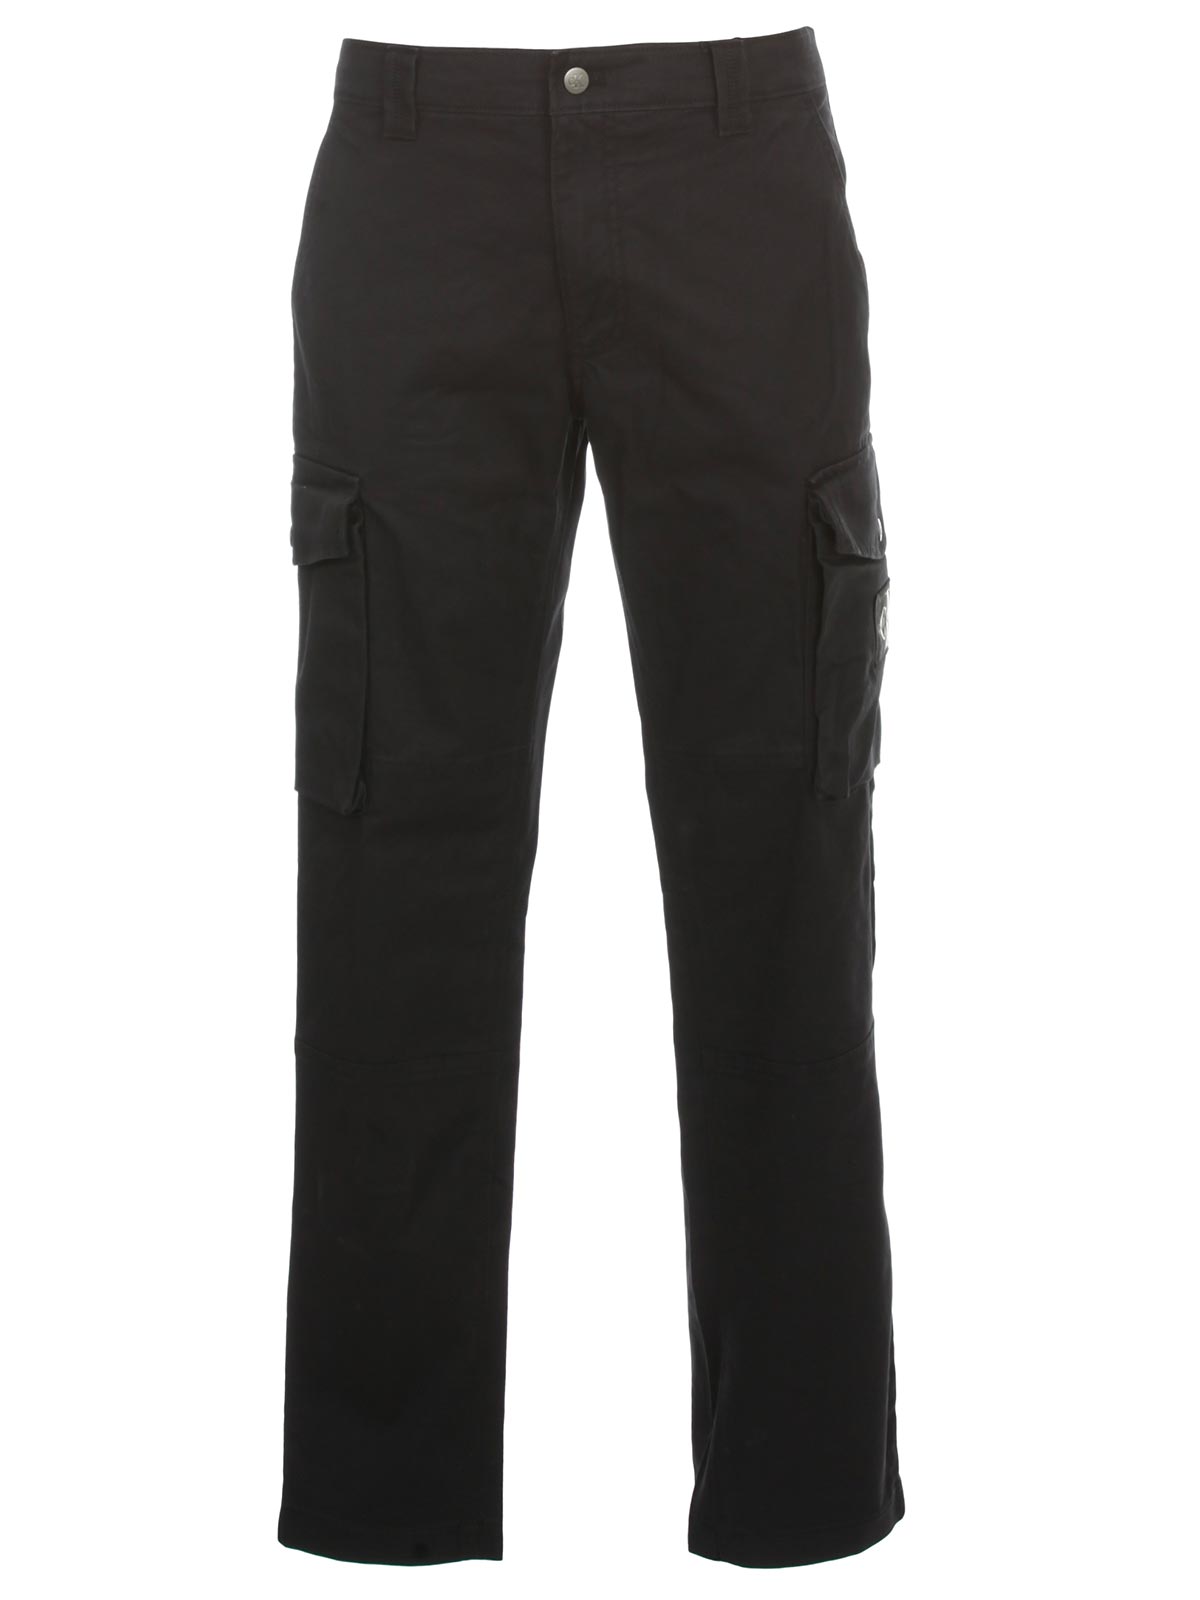 ck trousers